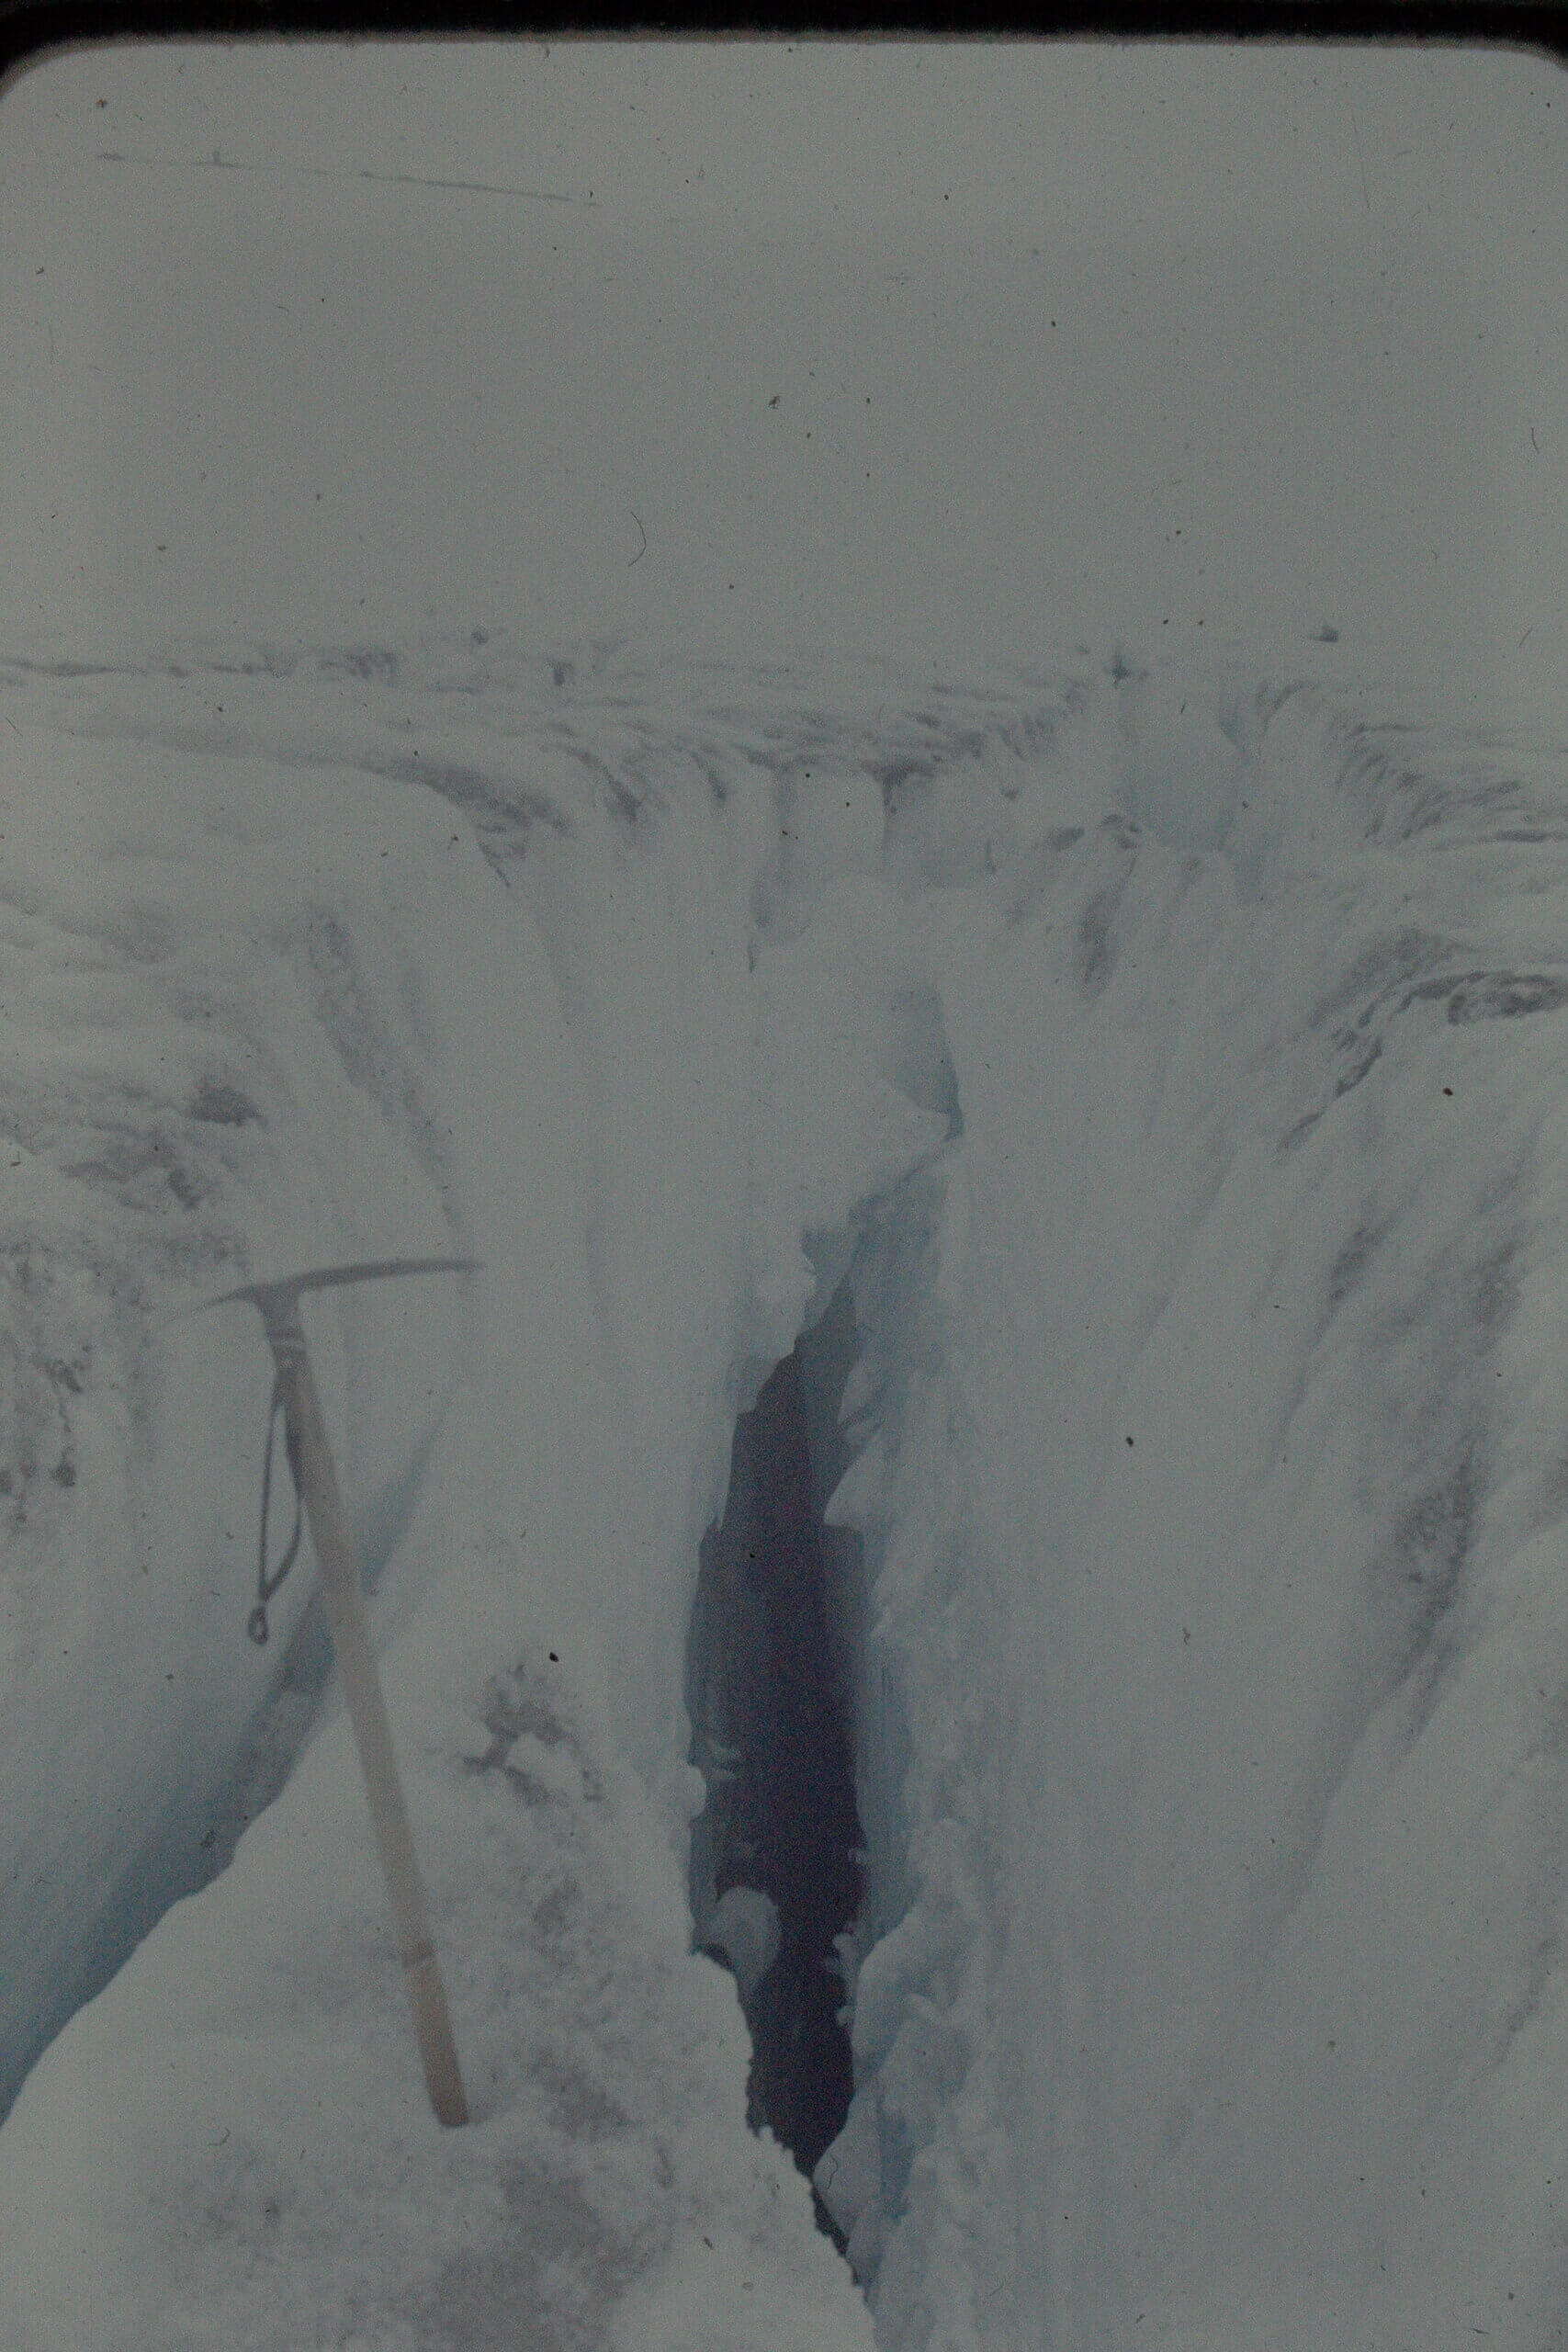 Another large crevasse